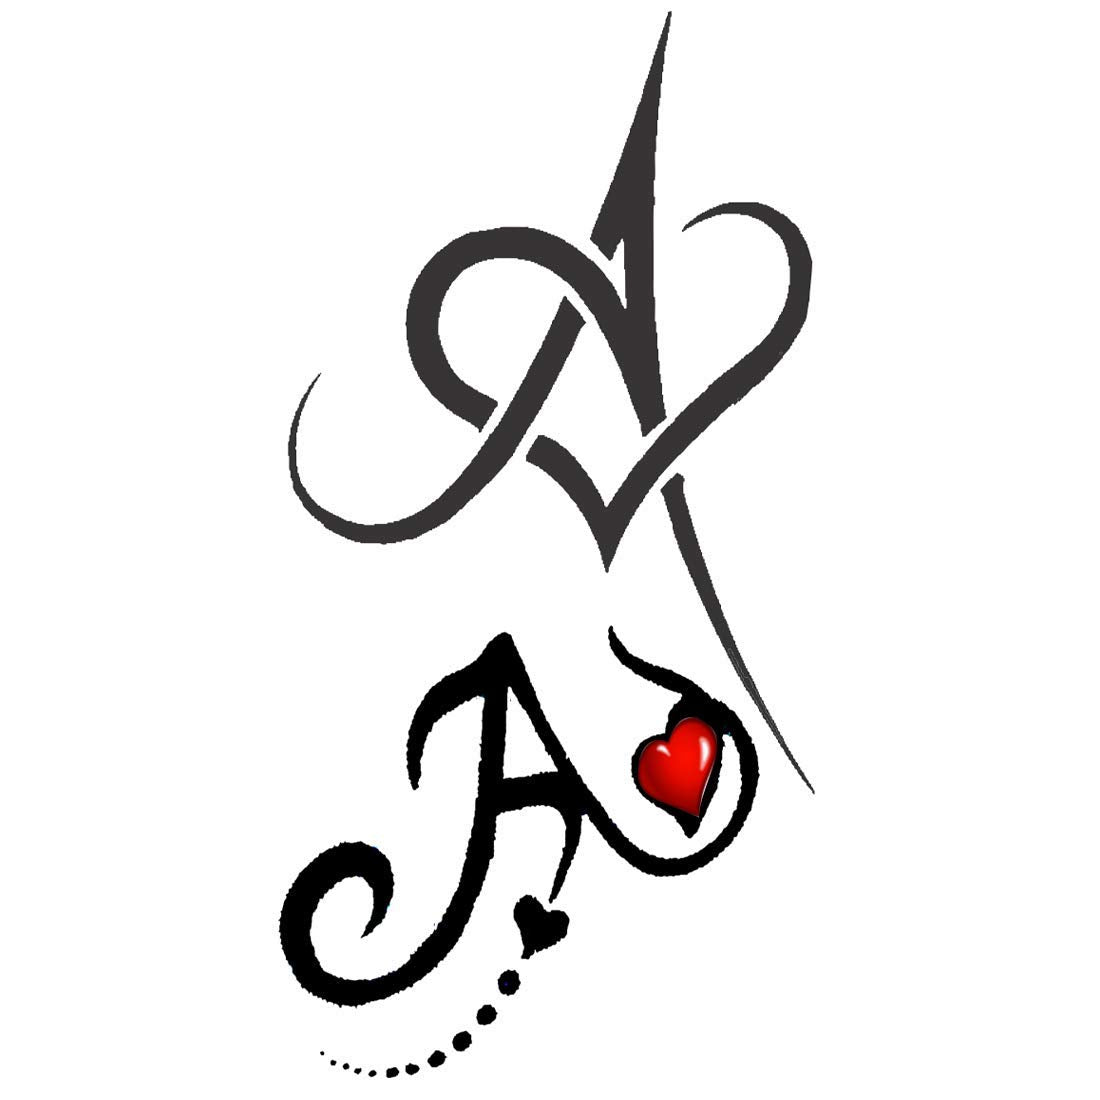 A letter tattoo design | Tattoo design for hand, Wrist tattoos for women,  Tattoo designs wrist